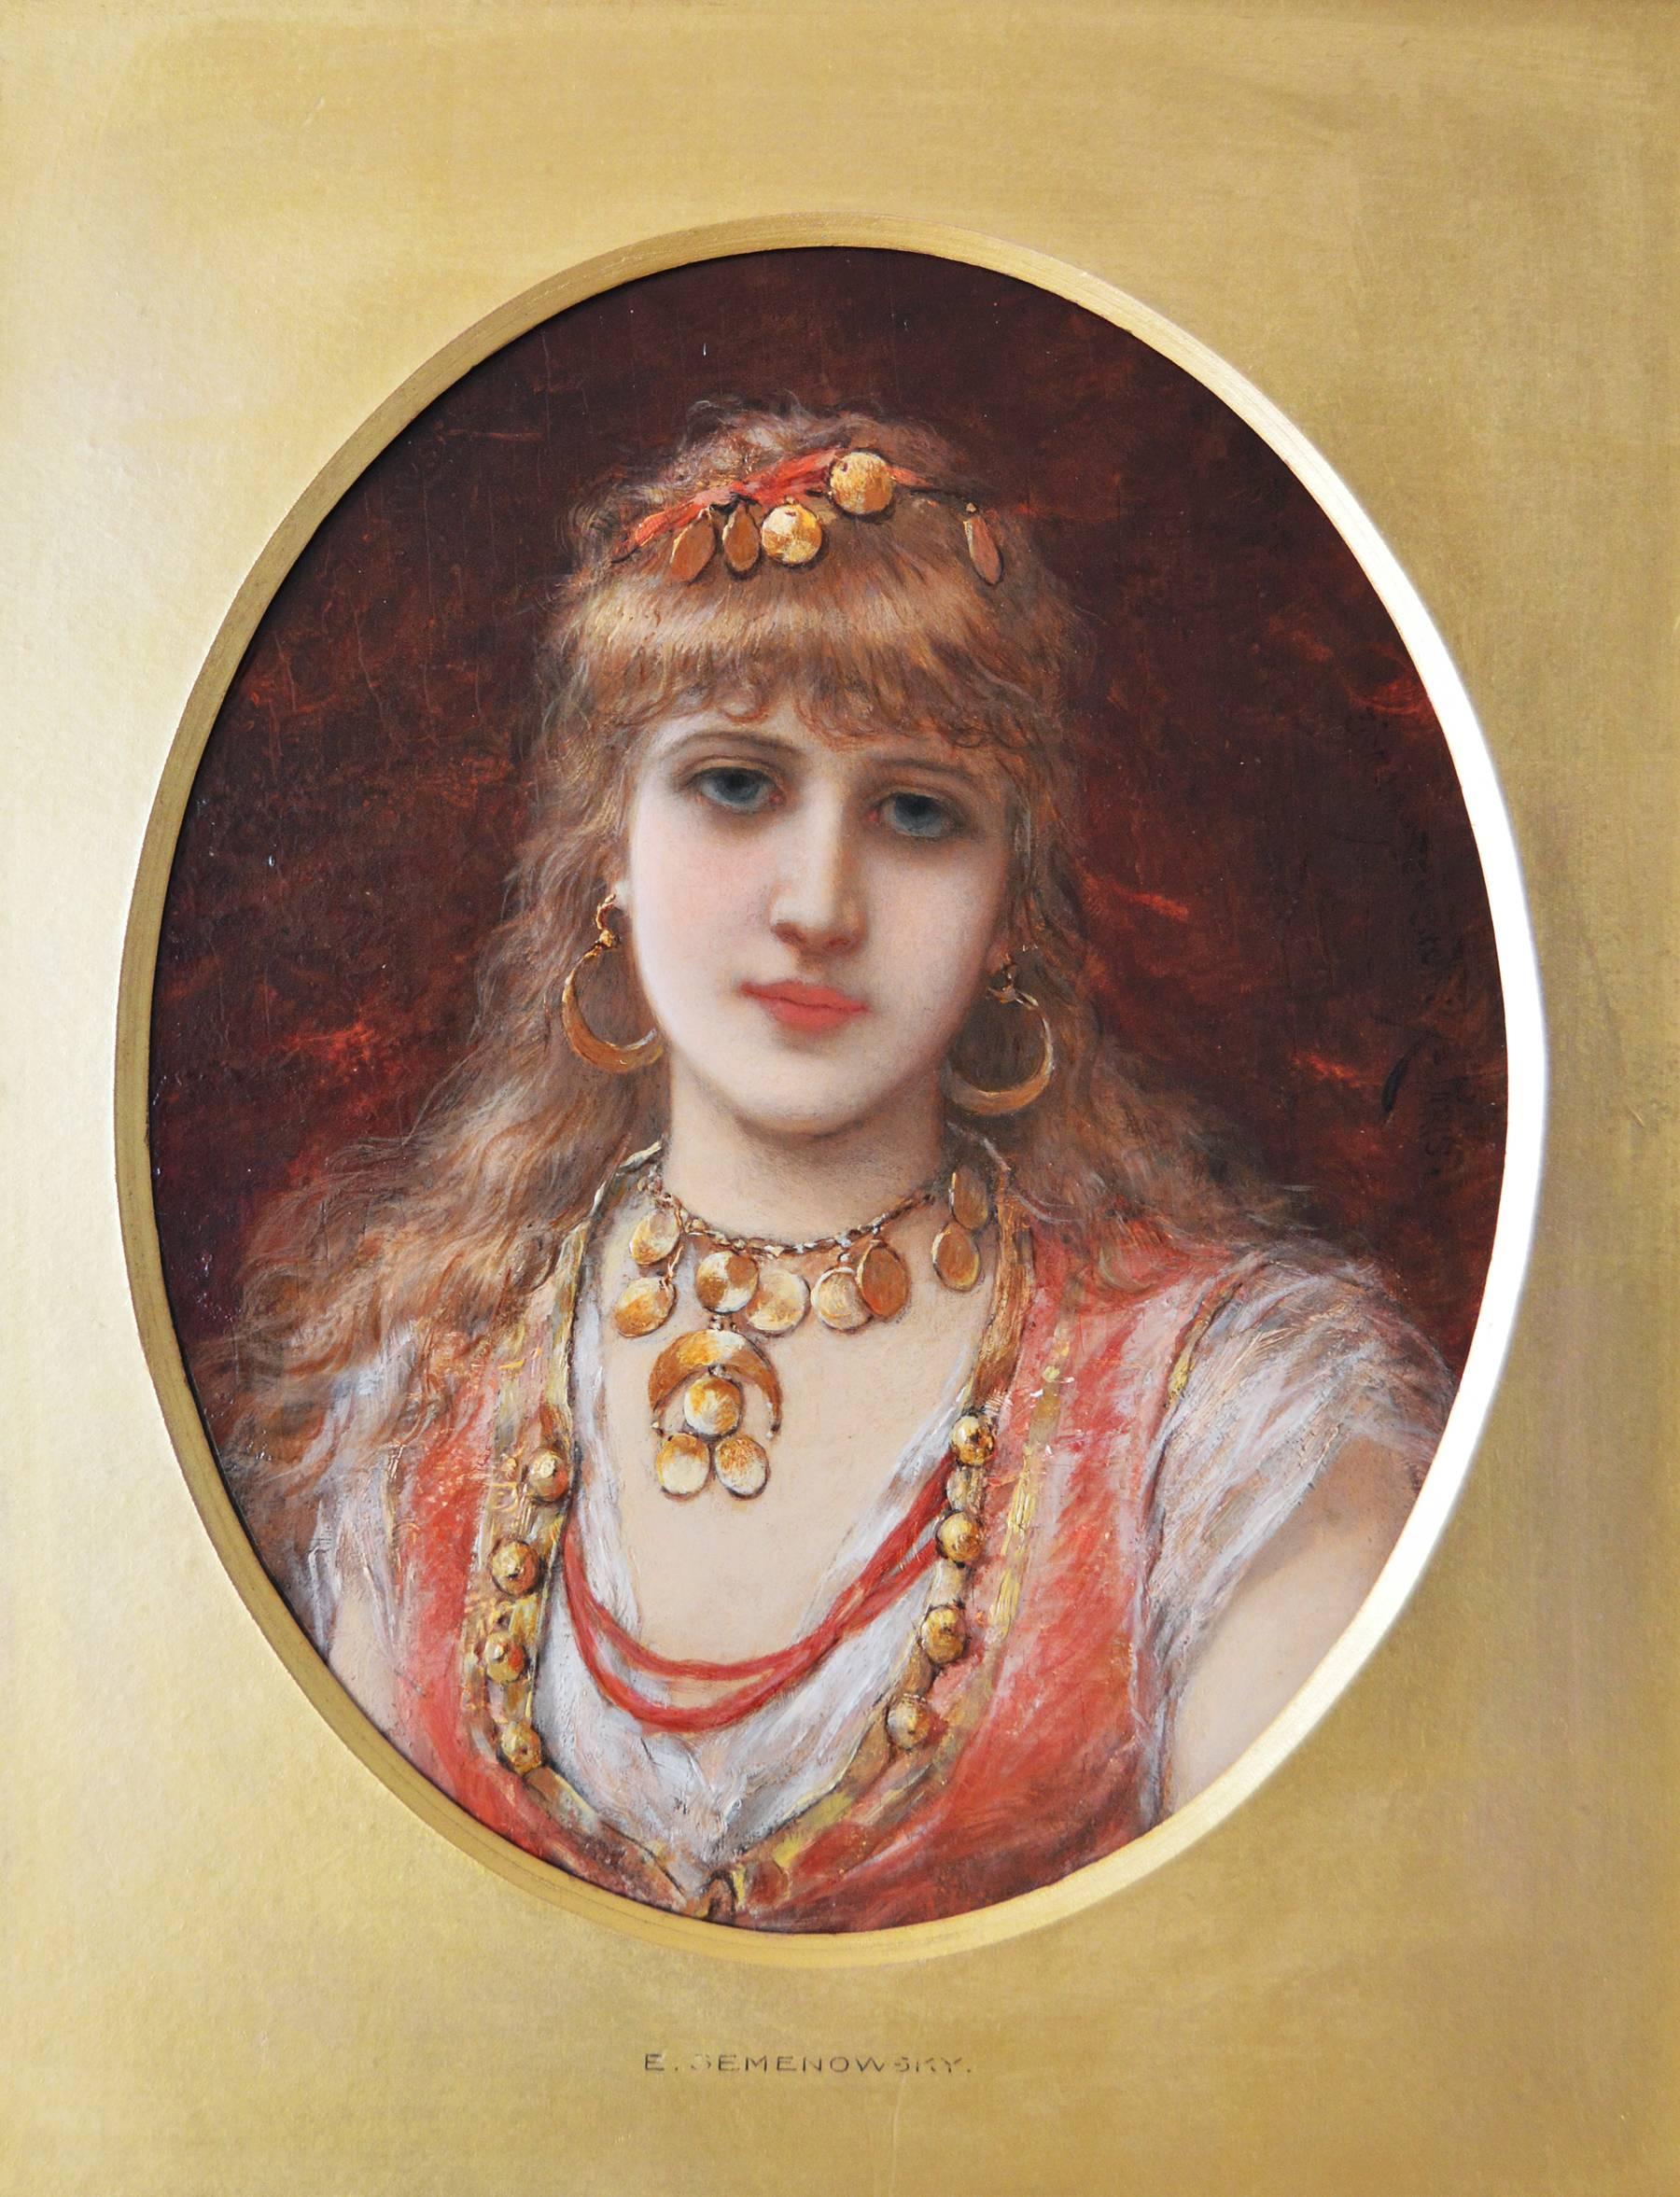 19th Century portrait oil painting of young woman - Painting by Émile Eisman-Semenowsky